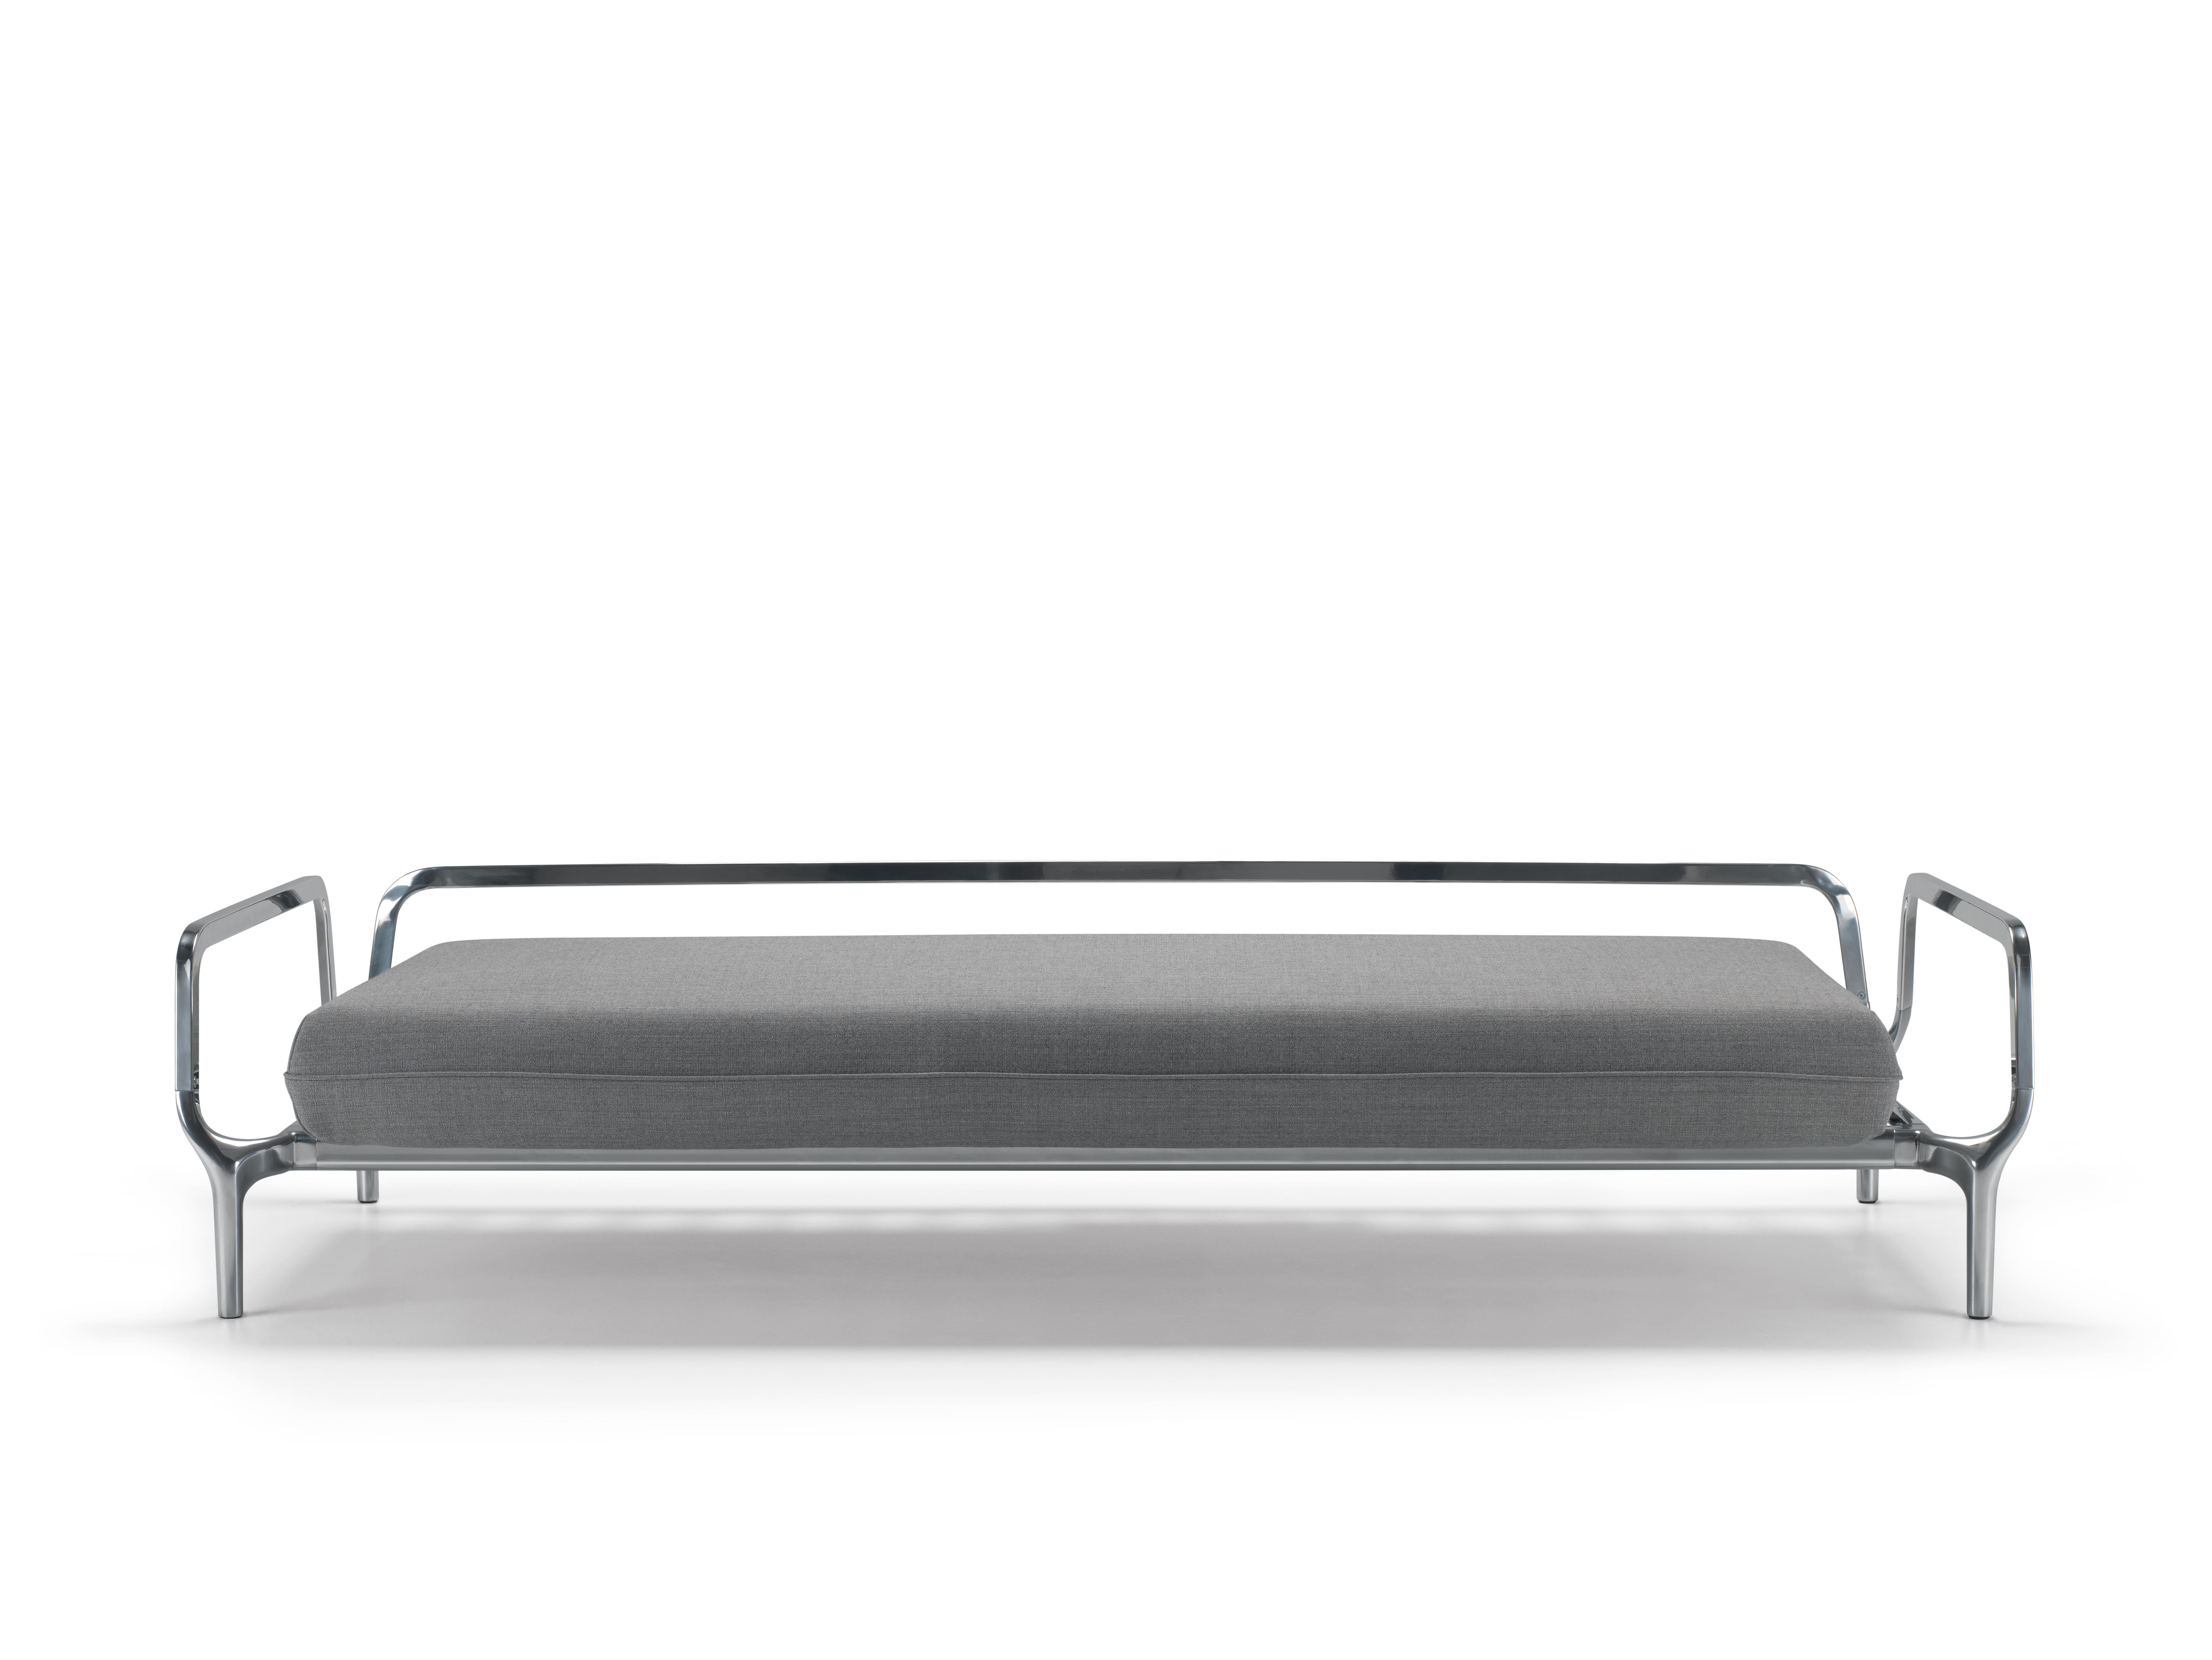 Italian Alias V02 Vina Sofa in Grey Upholstery with Cushions and Polished Aluminum Frame For Sale